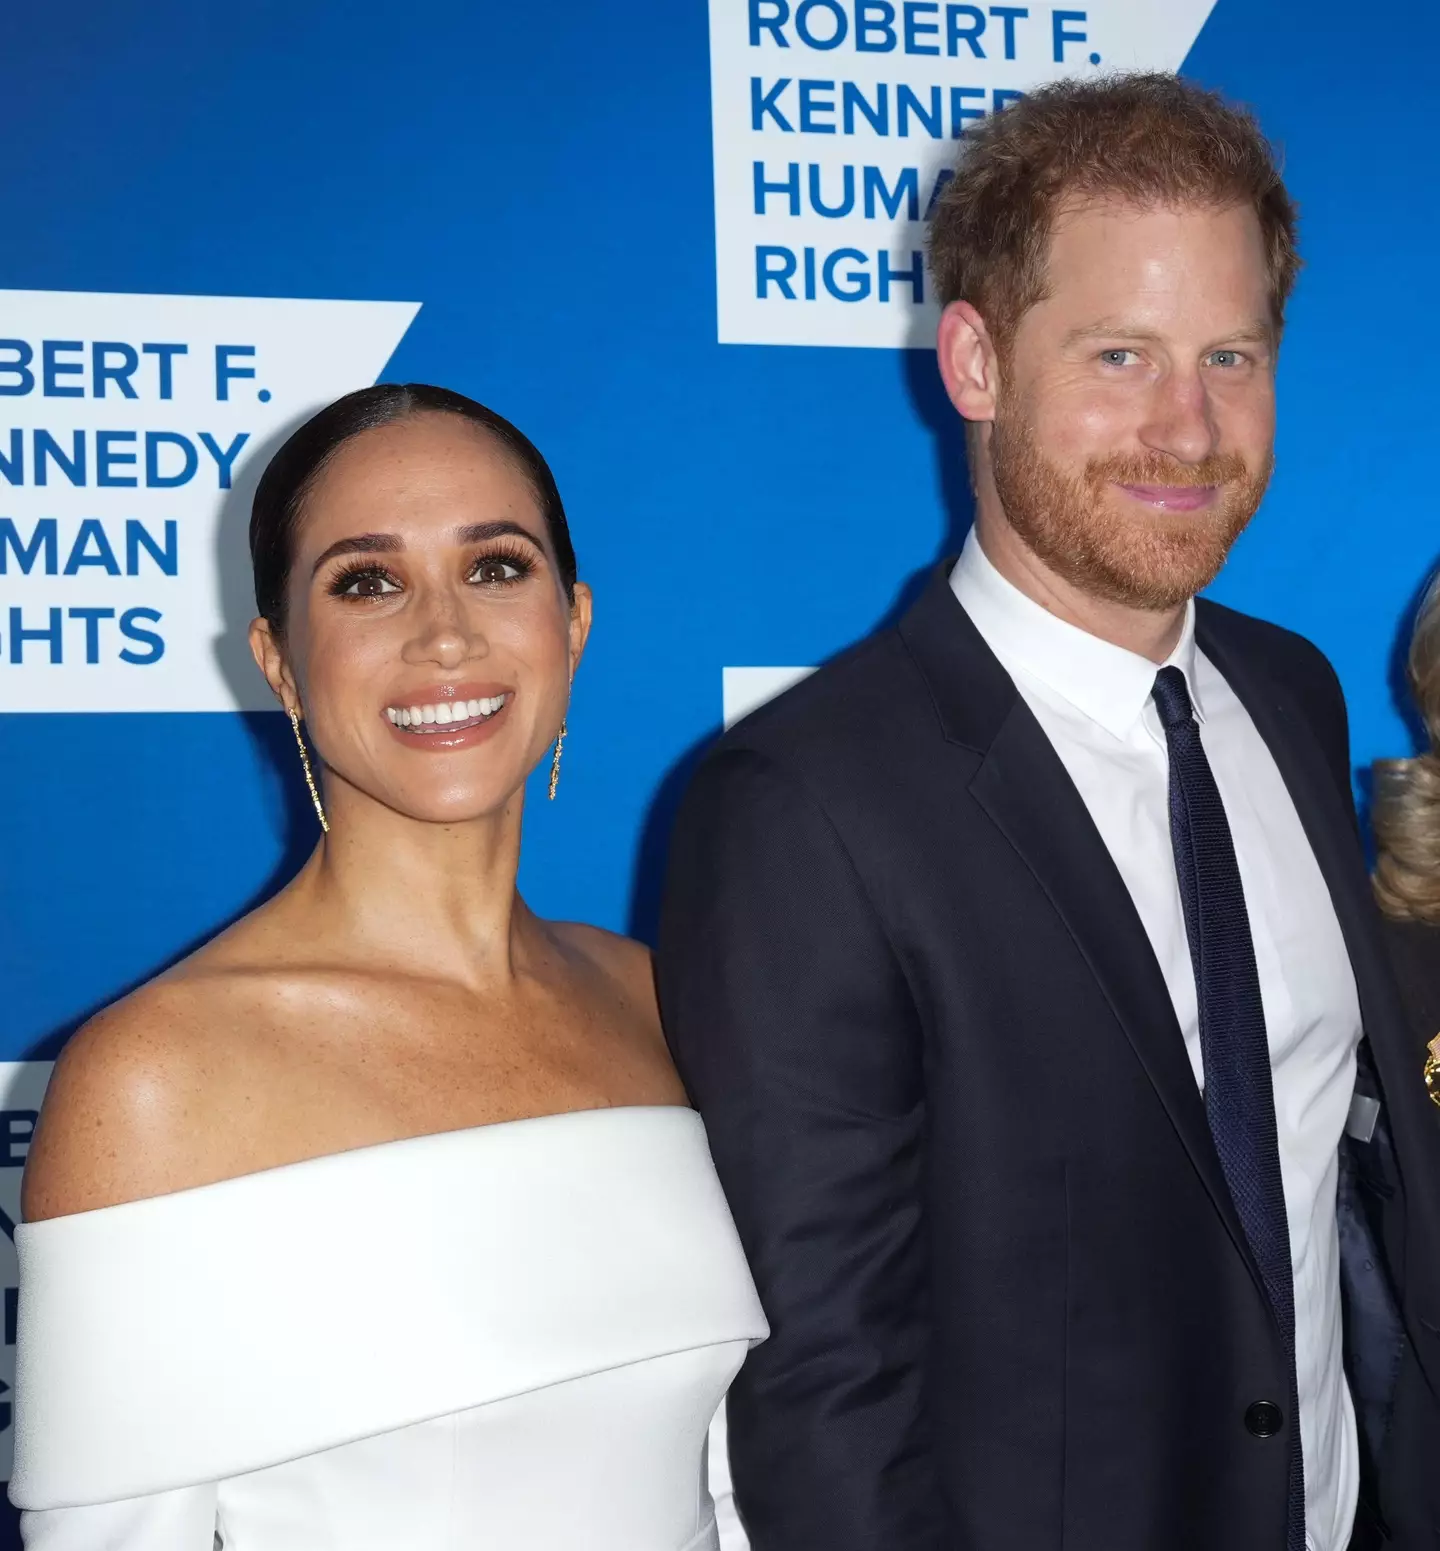 Harry and Meghan were all smiles at the 2022 Robert F. Kennedy Human Rights Ripple of Hope Gala.